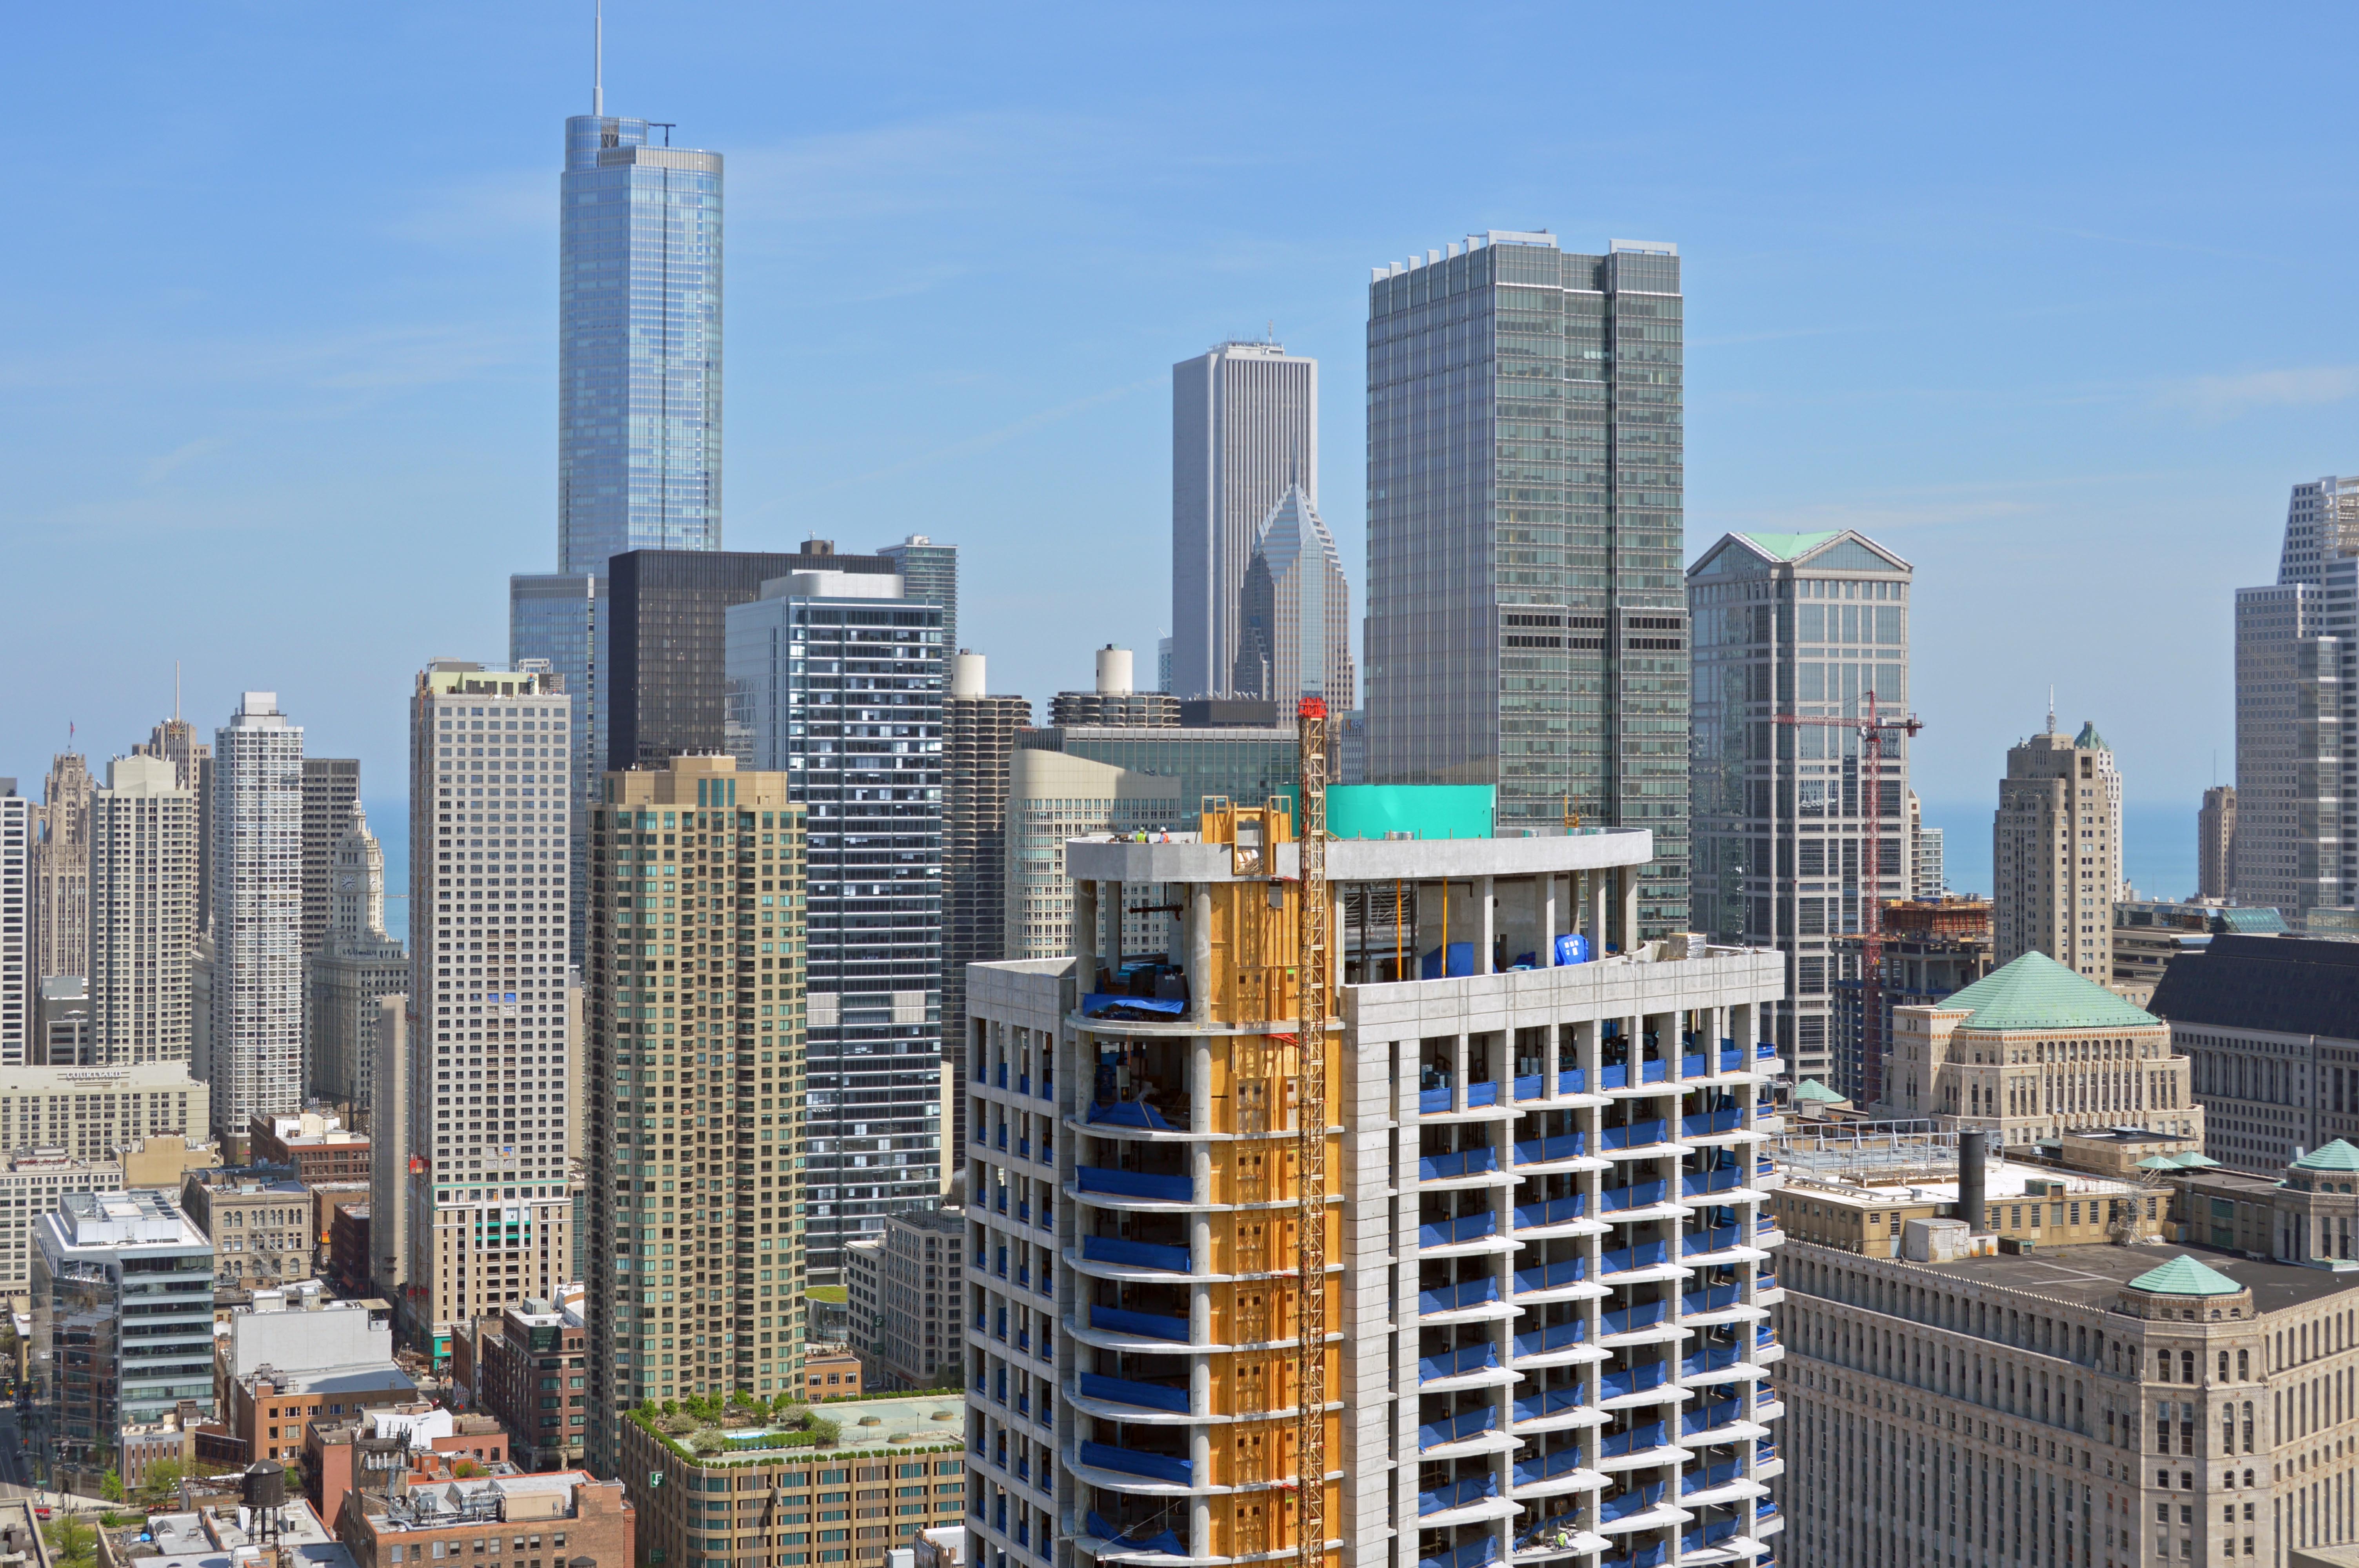 A view of three new apartment towers – YoChicago